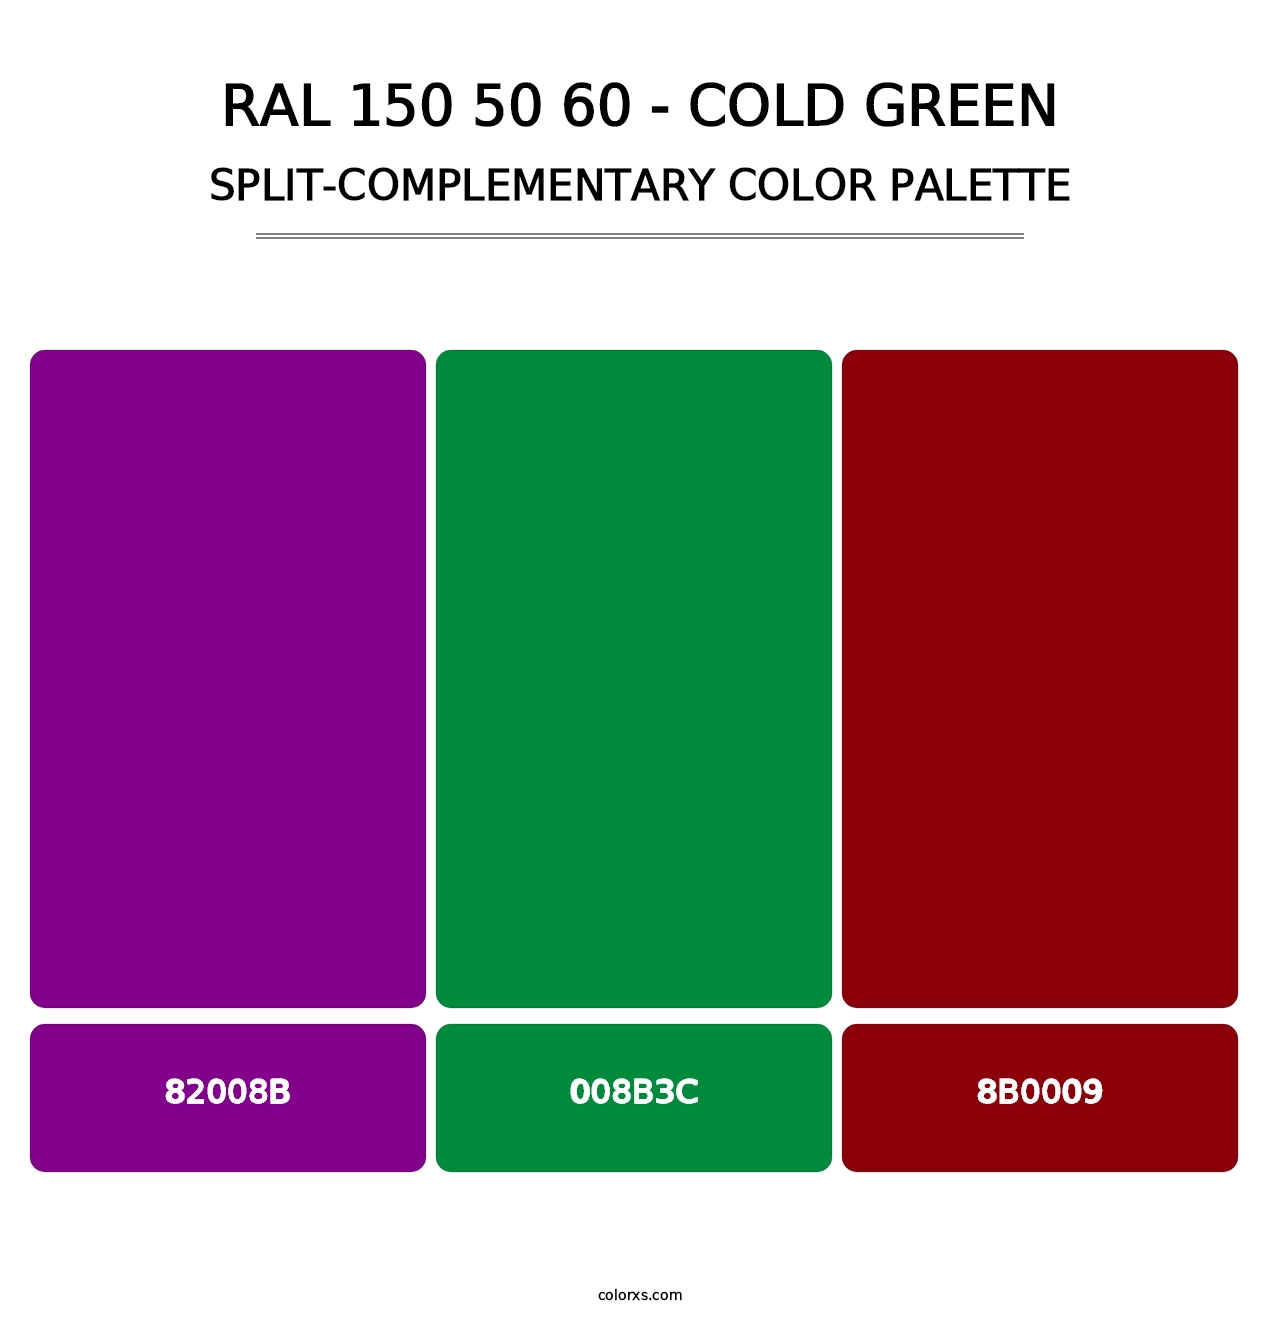 RAL 150 50 60 - Cold Green - Split-Complementary Color Palette